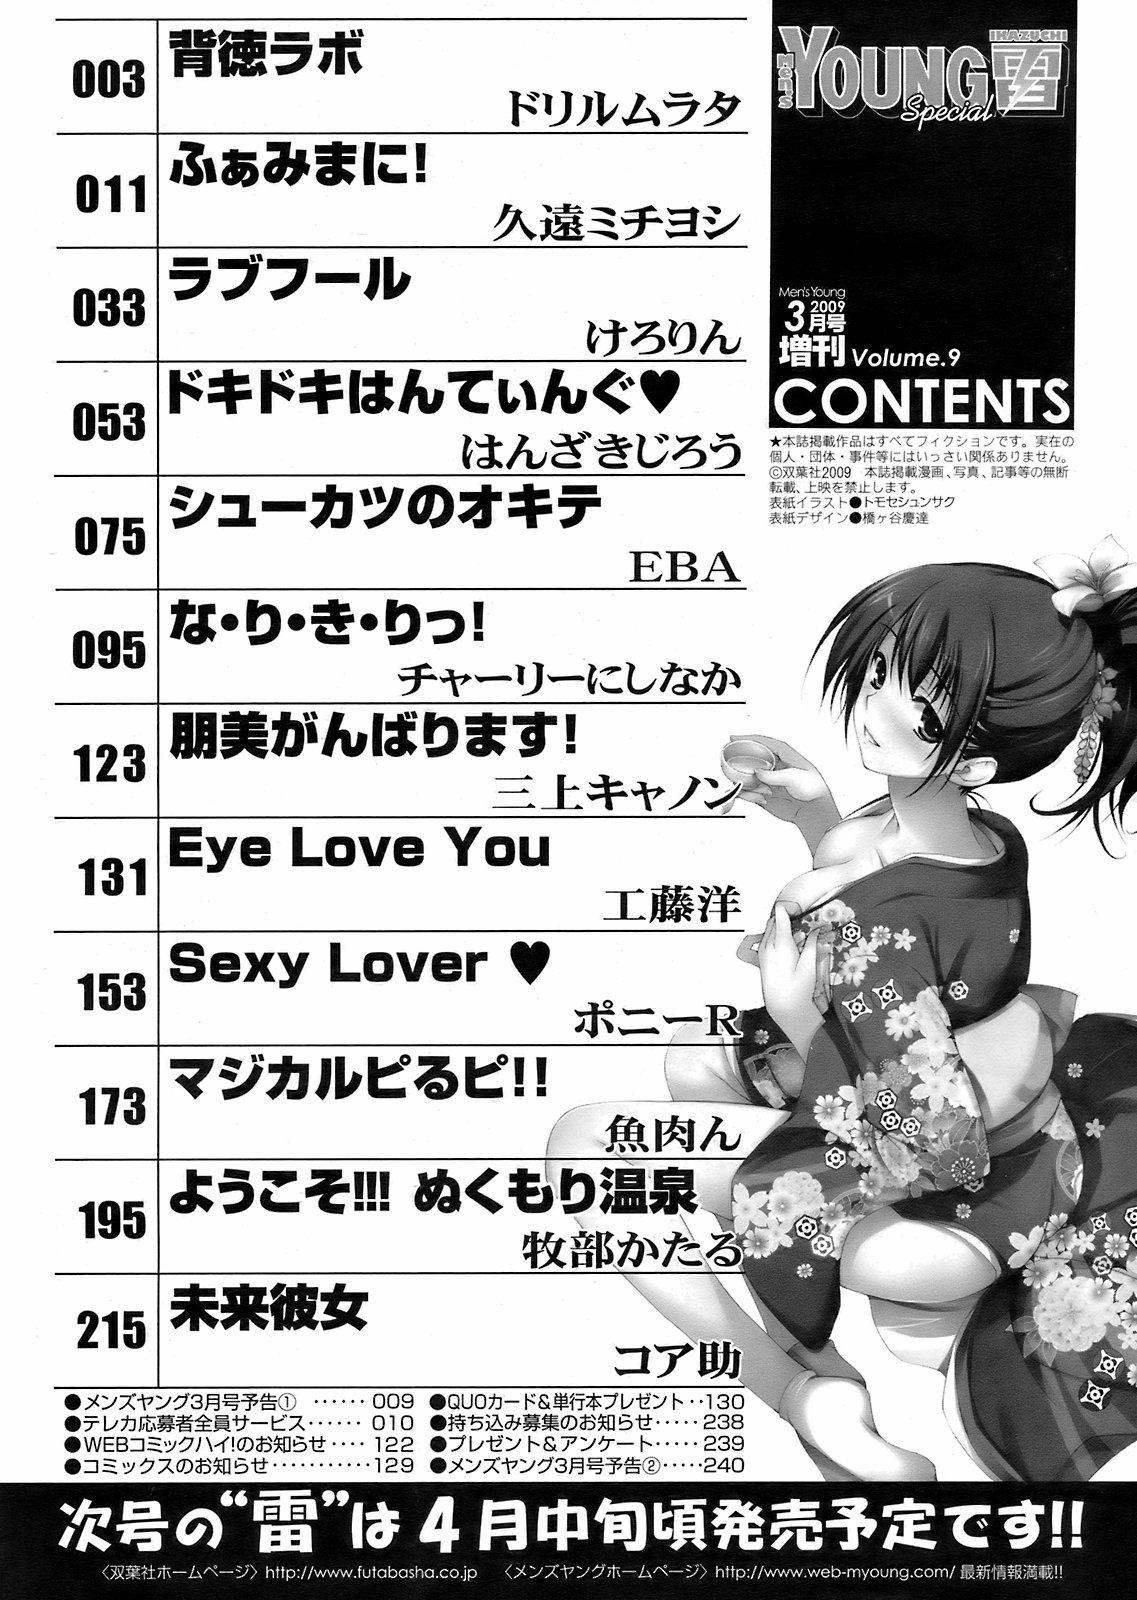 Best Blowjob Ever Men's Young Special IKAZUCHI 2009-03 Vol. 09 Doctor - Page 241